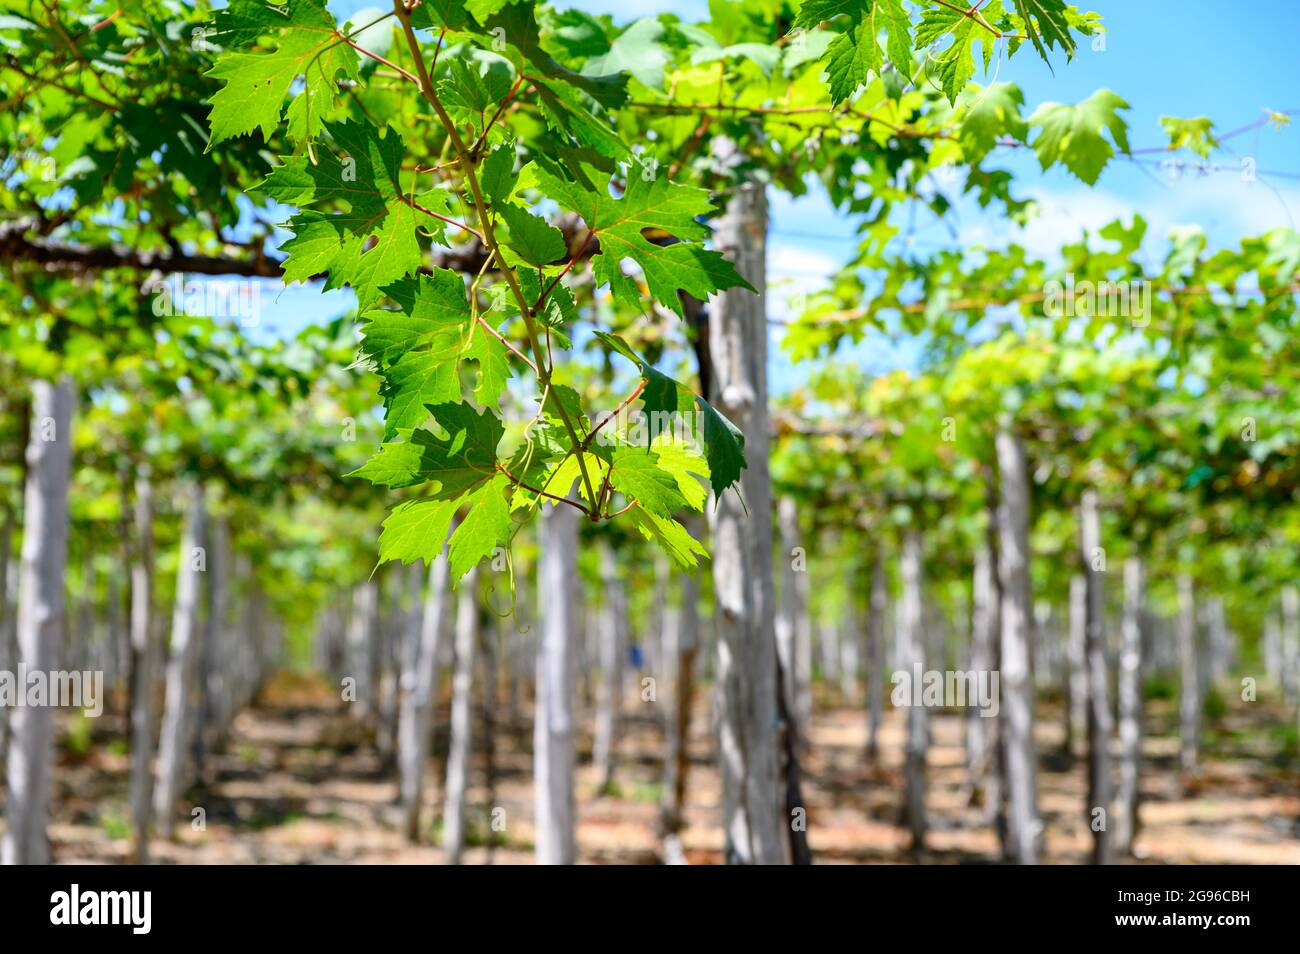 Panoramic of an Ecuadorian vineyard crop ready to be harvested. Raw red and white wine grapes, leafs, sunny day. Stock Photo